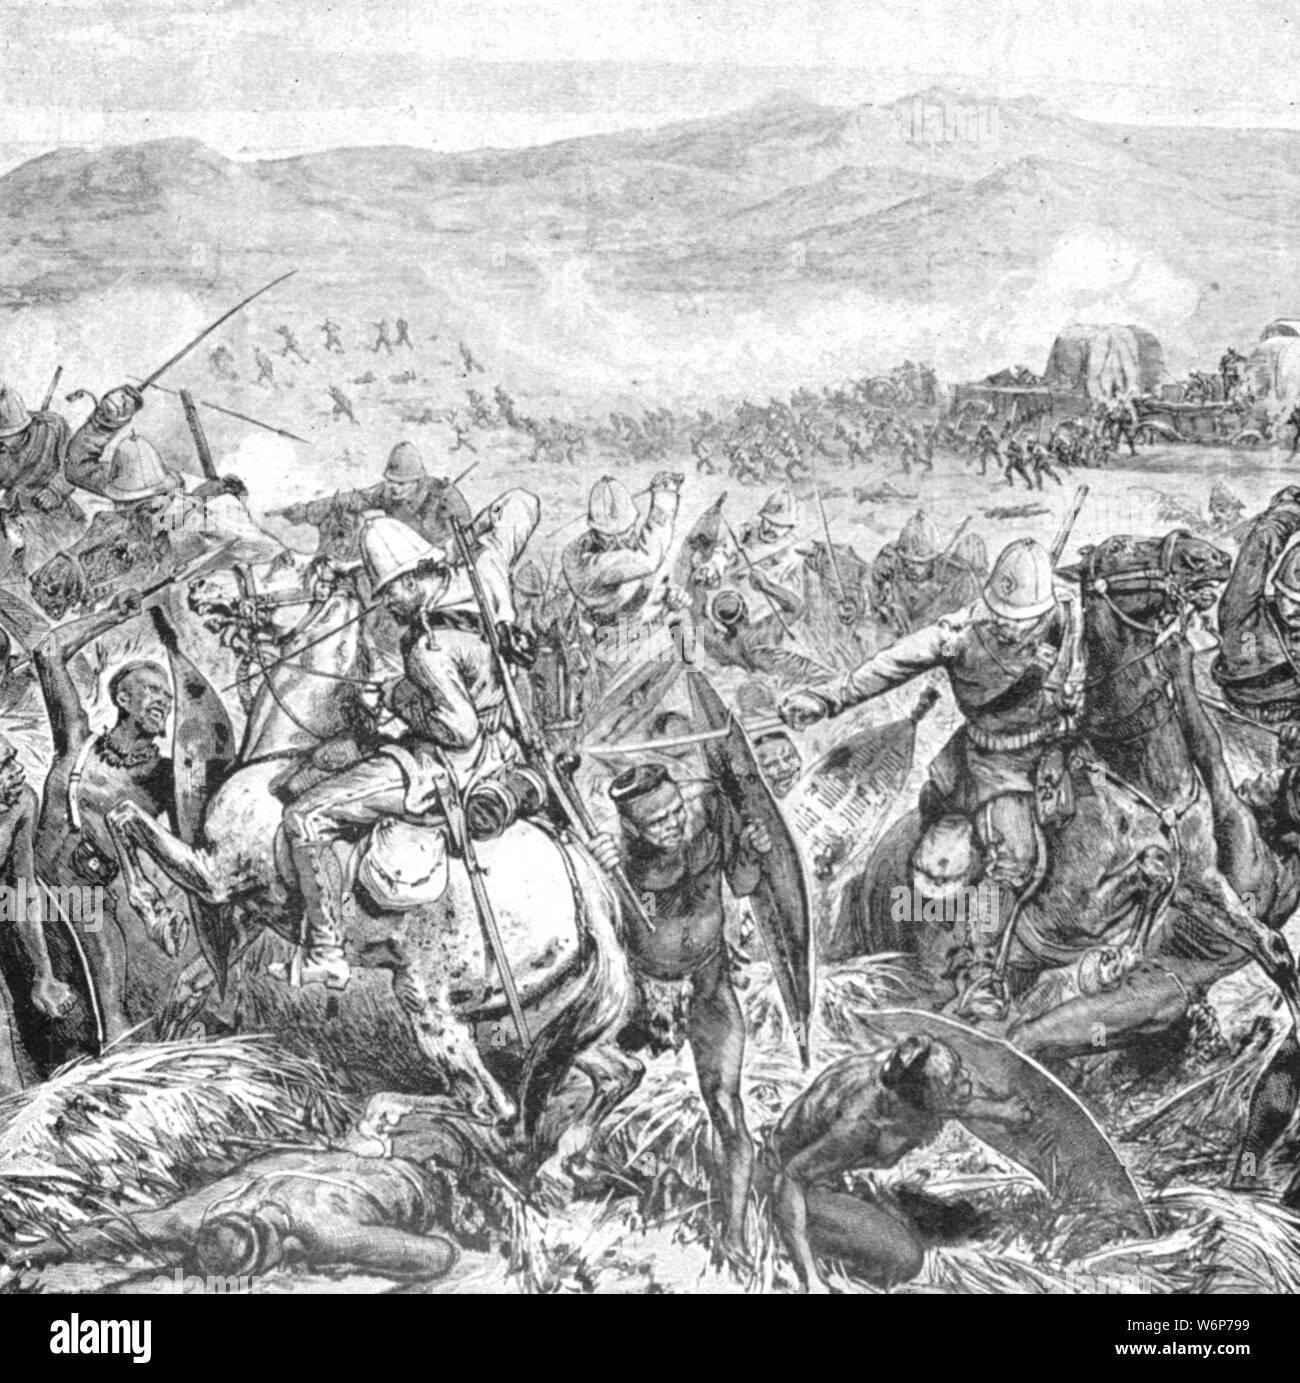 'The Zulu War, 1879: The final repulse of the Zulus at Ginghilovo, April 2', (1901). The Battle of Gingindlovu (in what is now South Africa) was fought between British soldiers and sailors, and Zulu warriors of King Cetshwayo. From &quot;The Illustrated London News Record of the Glorious Reign of Queen Victoria 1837-1901: The Life and Accession of King Edward VII. and the Life of Queen Alexandra&quot;. [London, 1901] Stock Photo